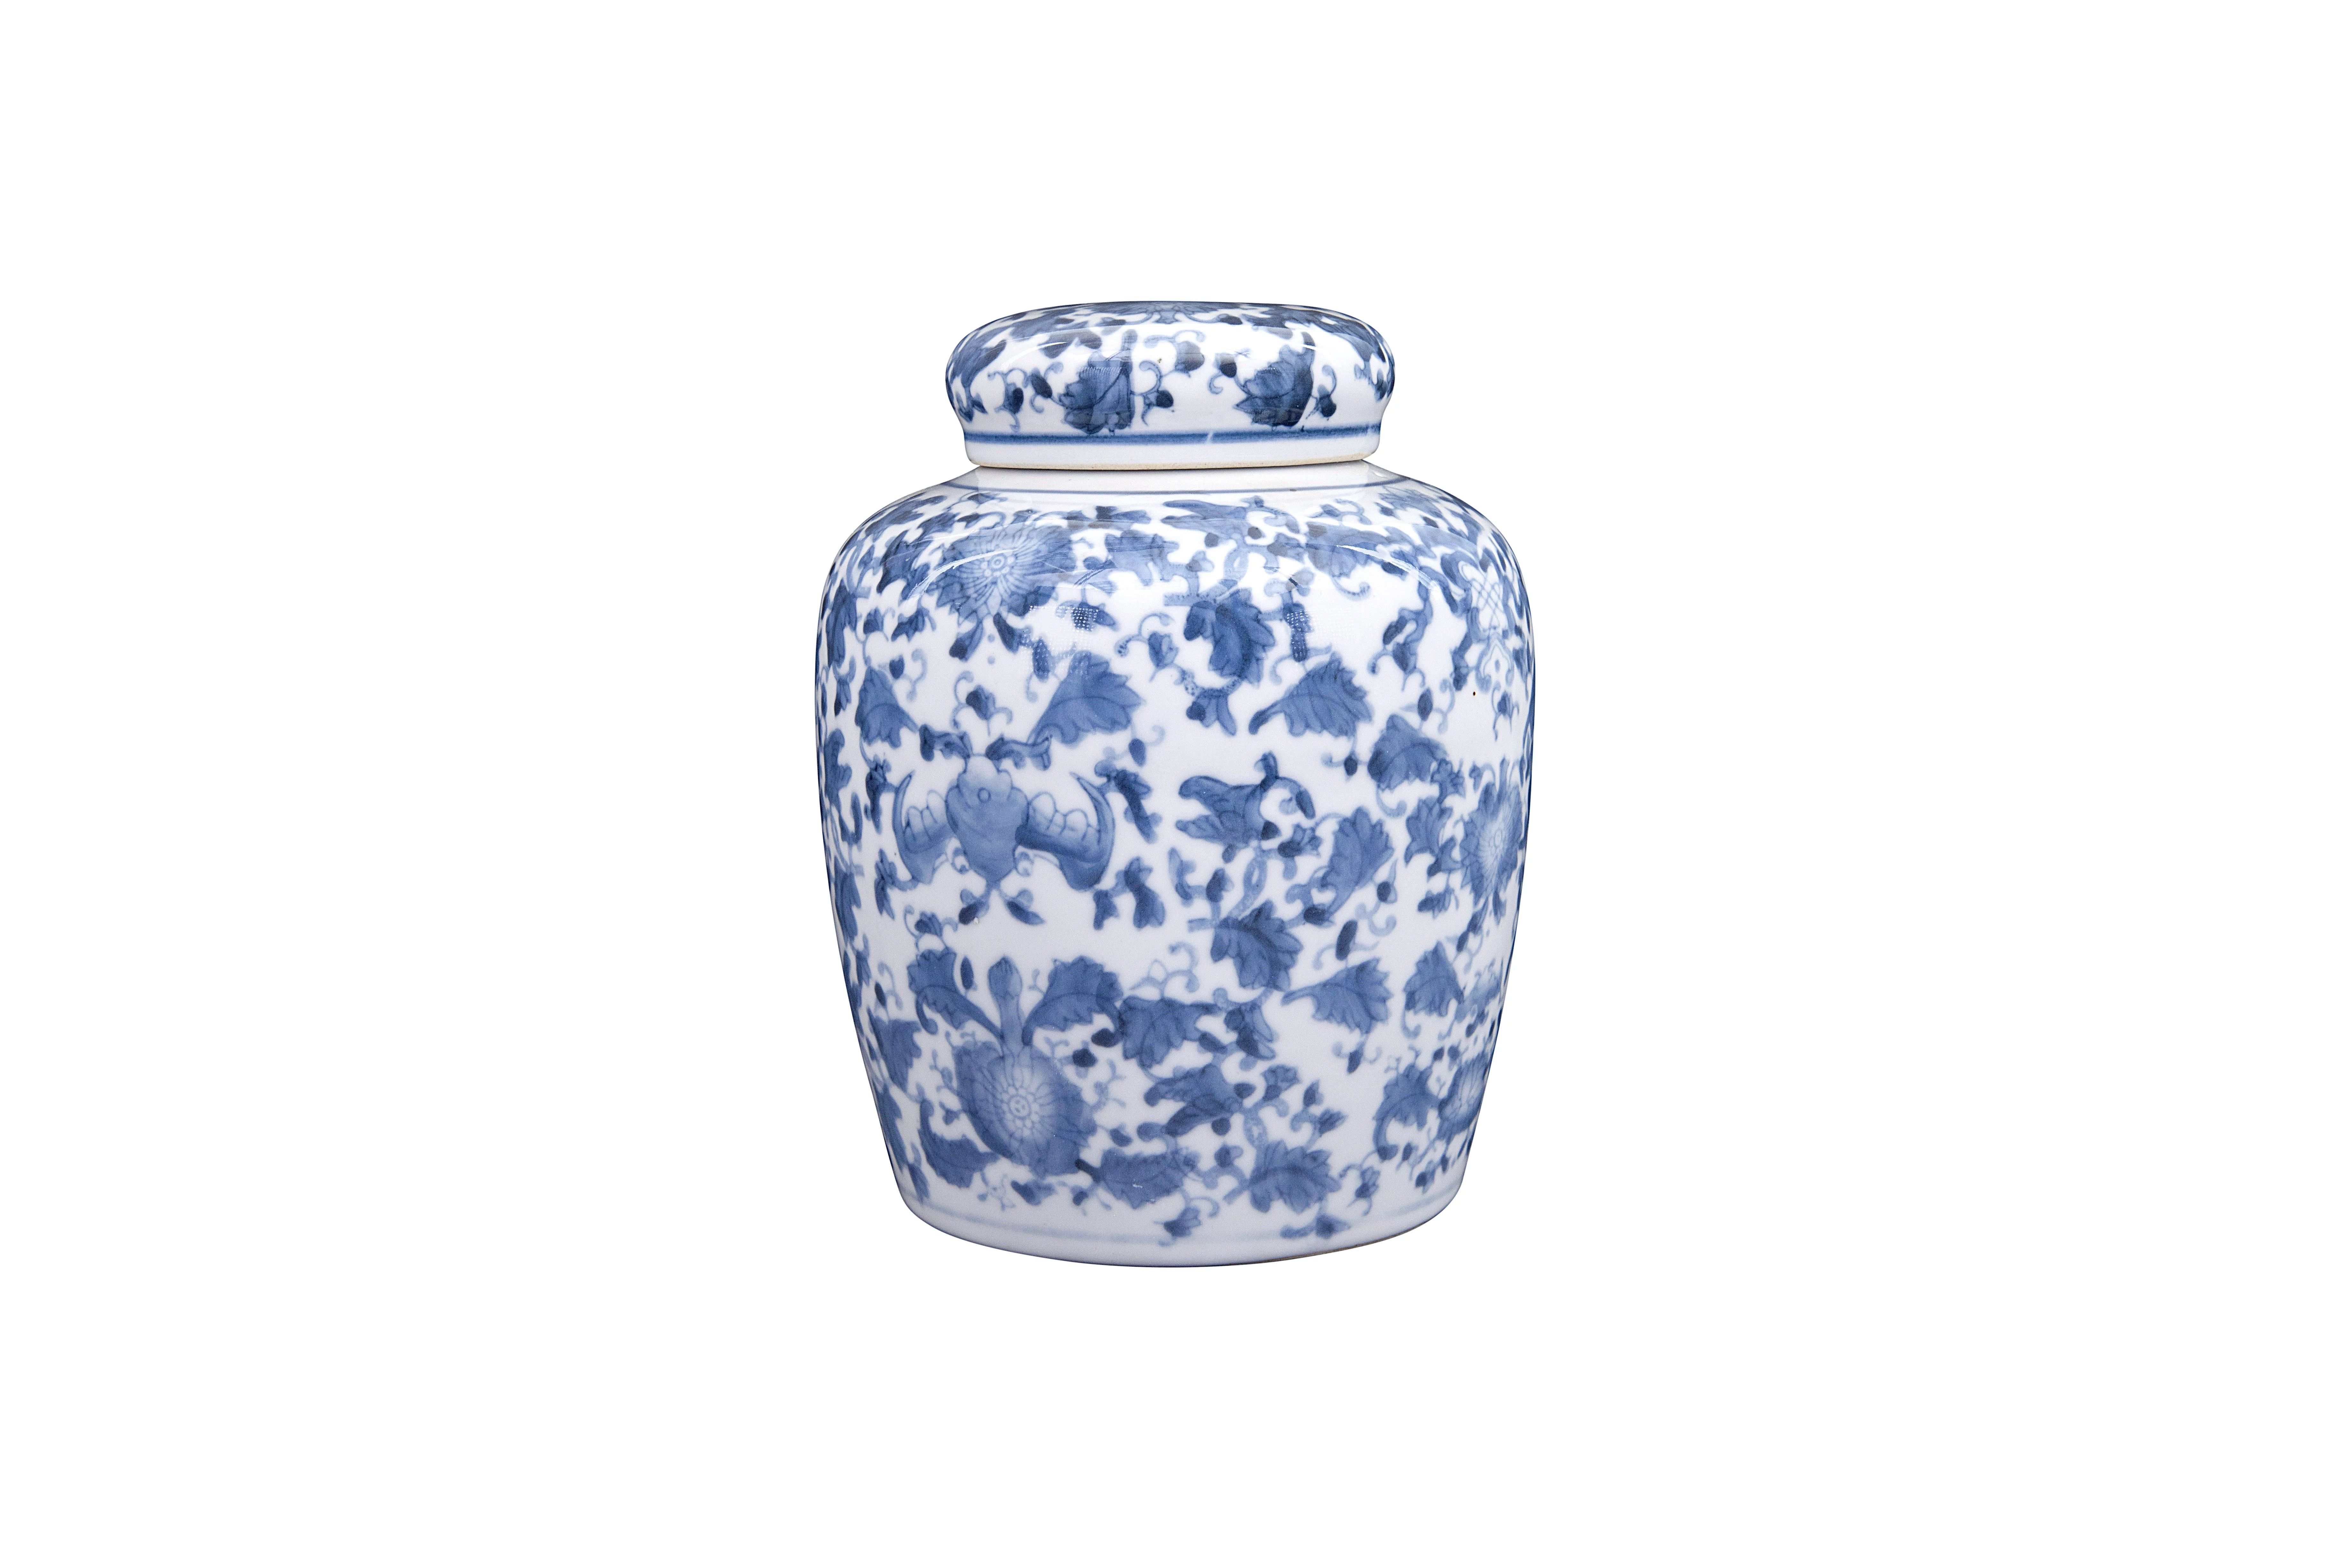 Woven Paths Blue and White Ginger Jar with Lid | Walmart (US)